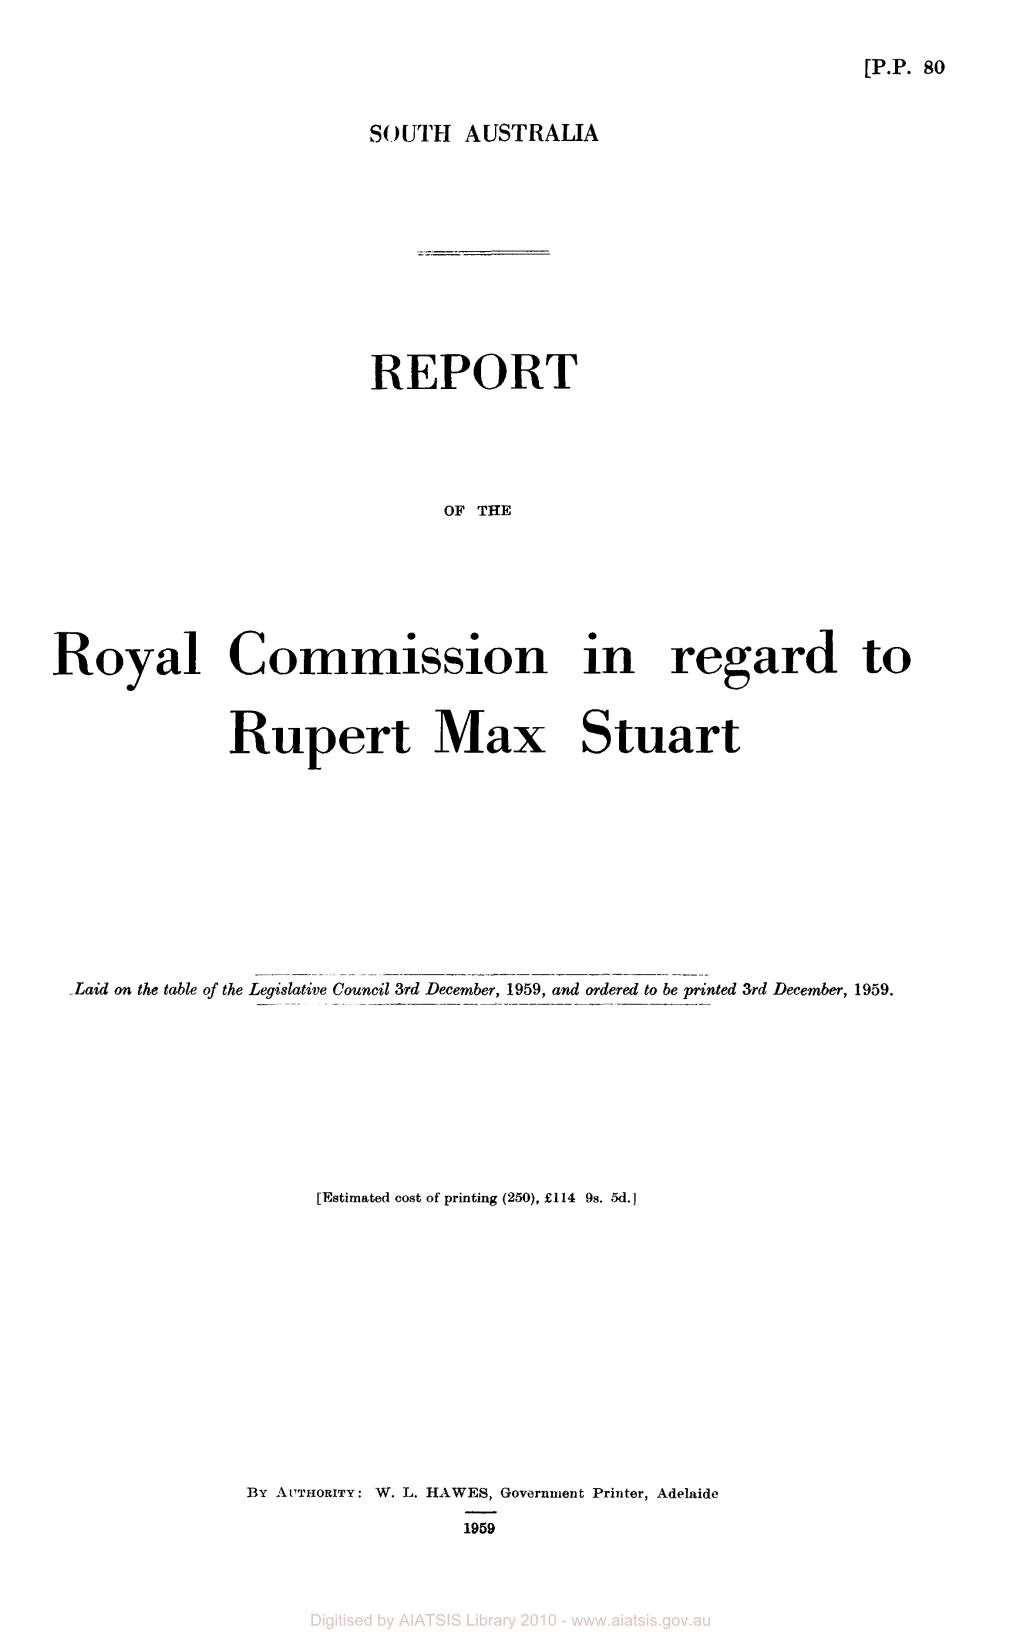 Report of the Royal Commission in Regard to Rupert Max Stuart